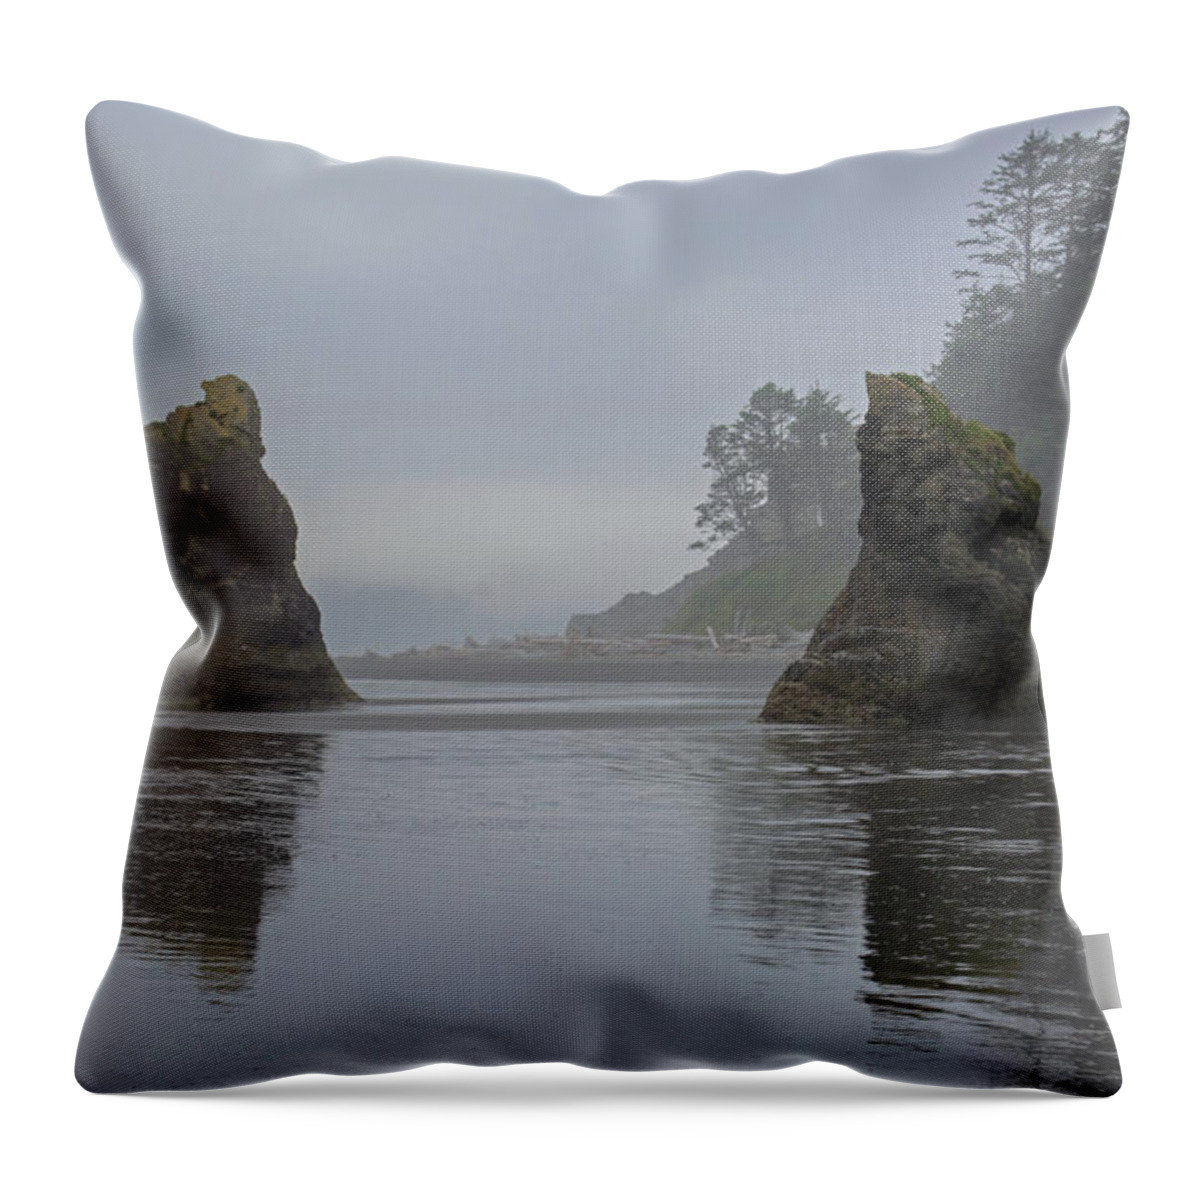 Beach Throw Pillow featuring the photograph Ruby Beach Reflections by Tikvah's Hope